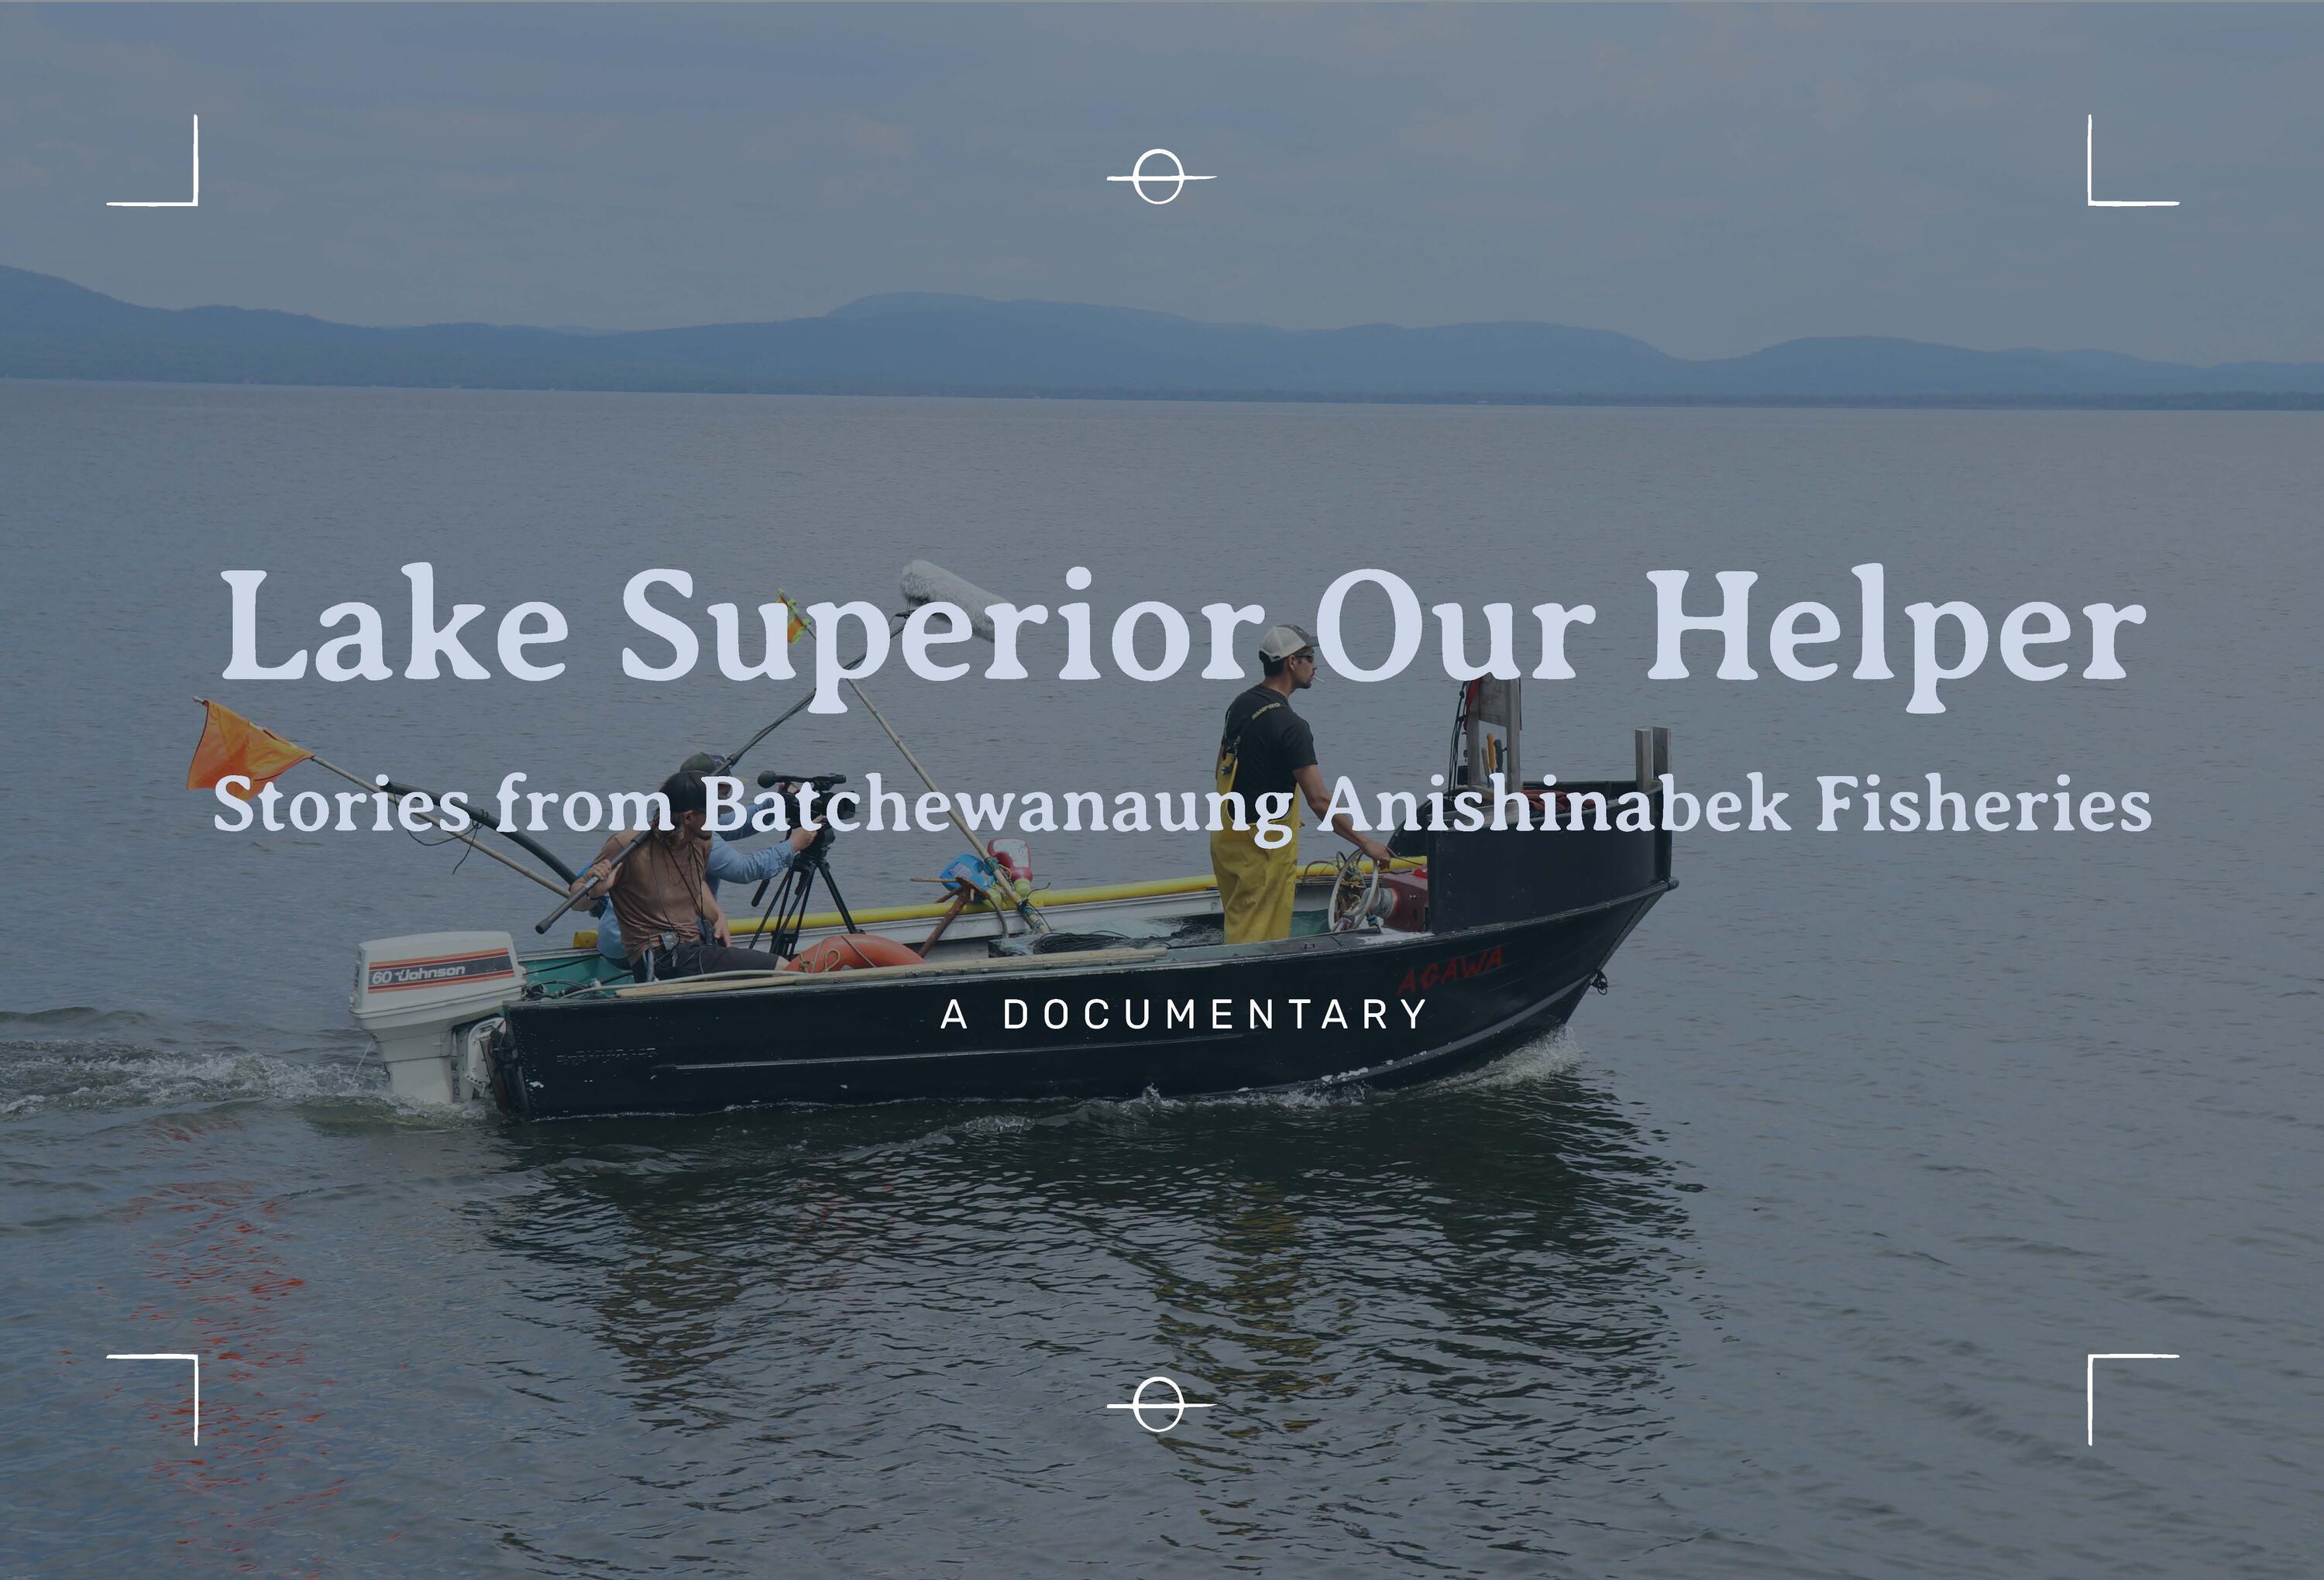 Lake Superior Our Helper: Stories from Batchewanaung Anishinabek Fisheries